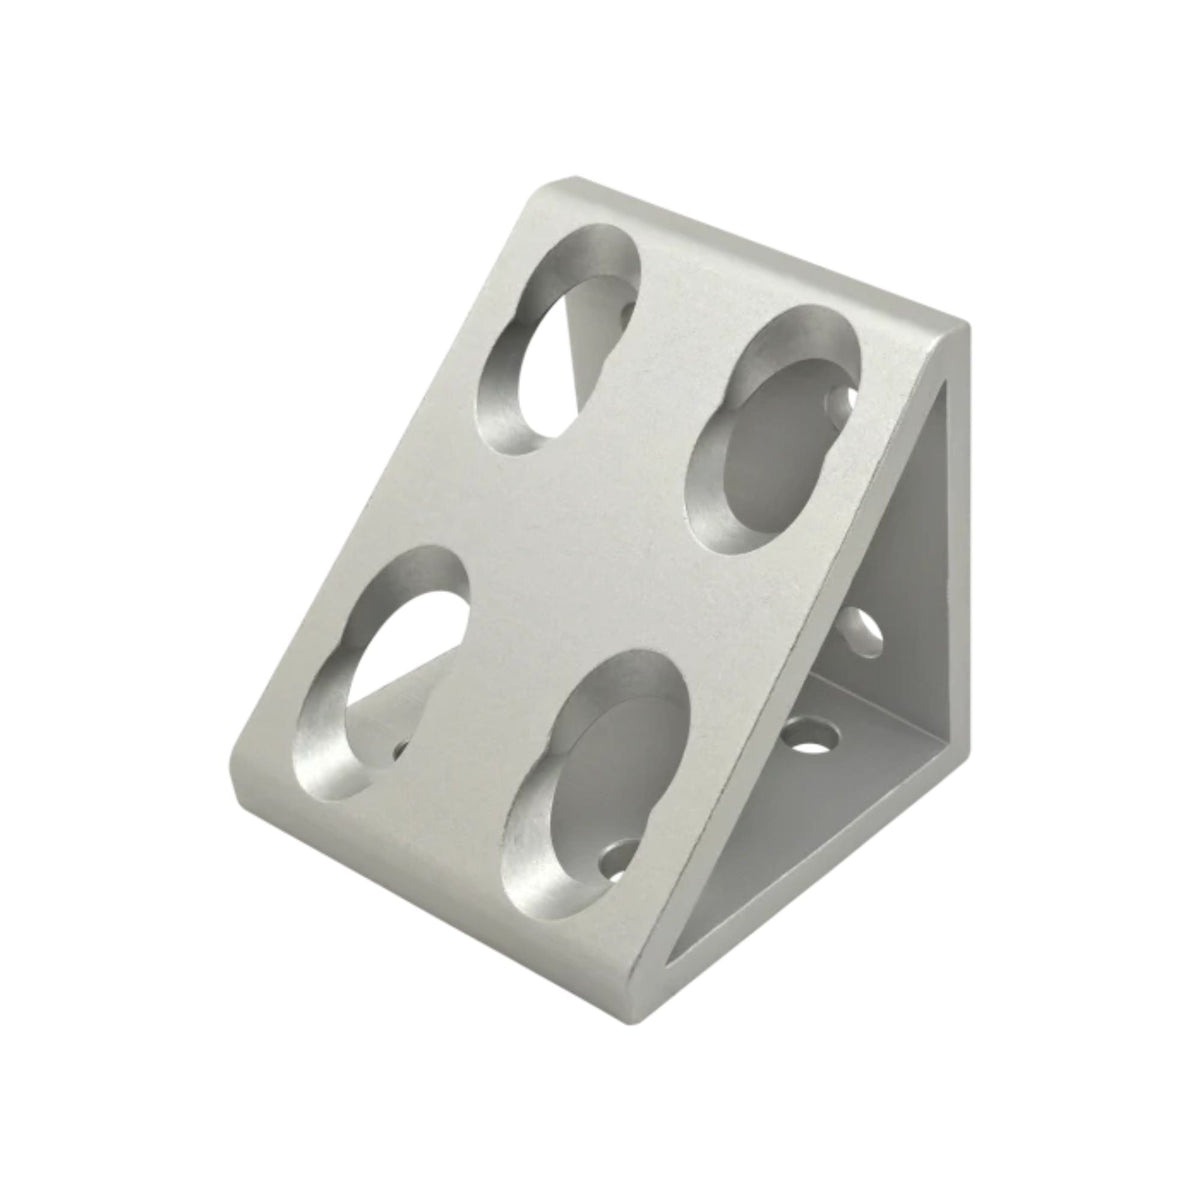 triangular shaped corner bracket with four holes on the larger side